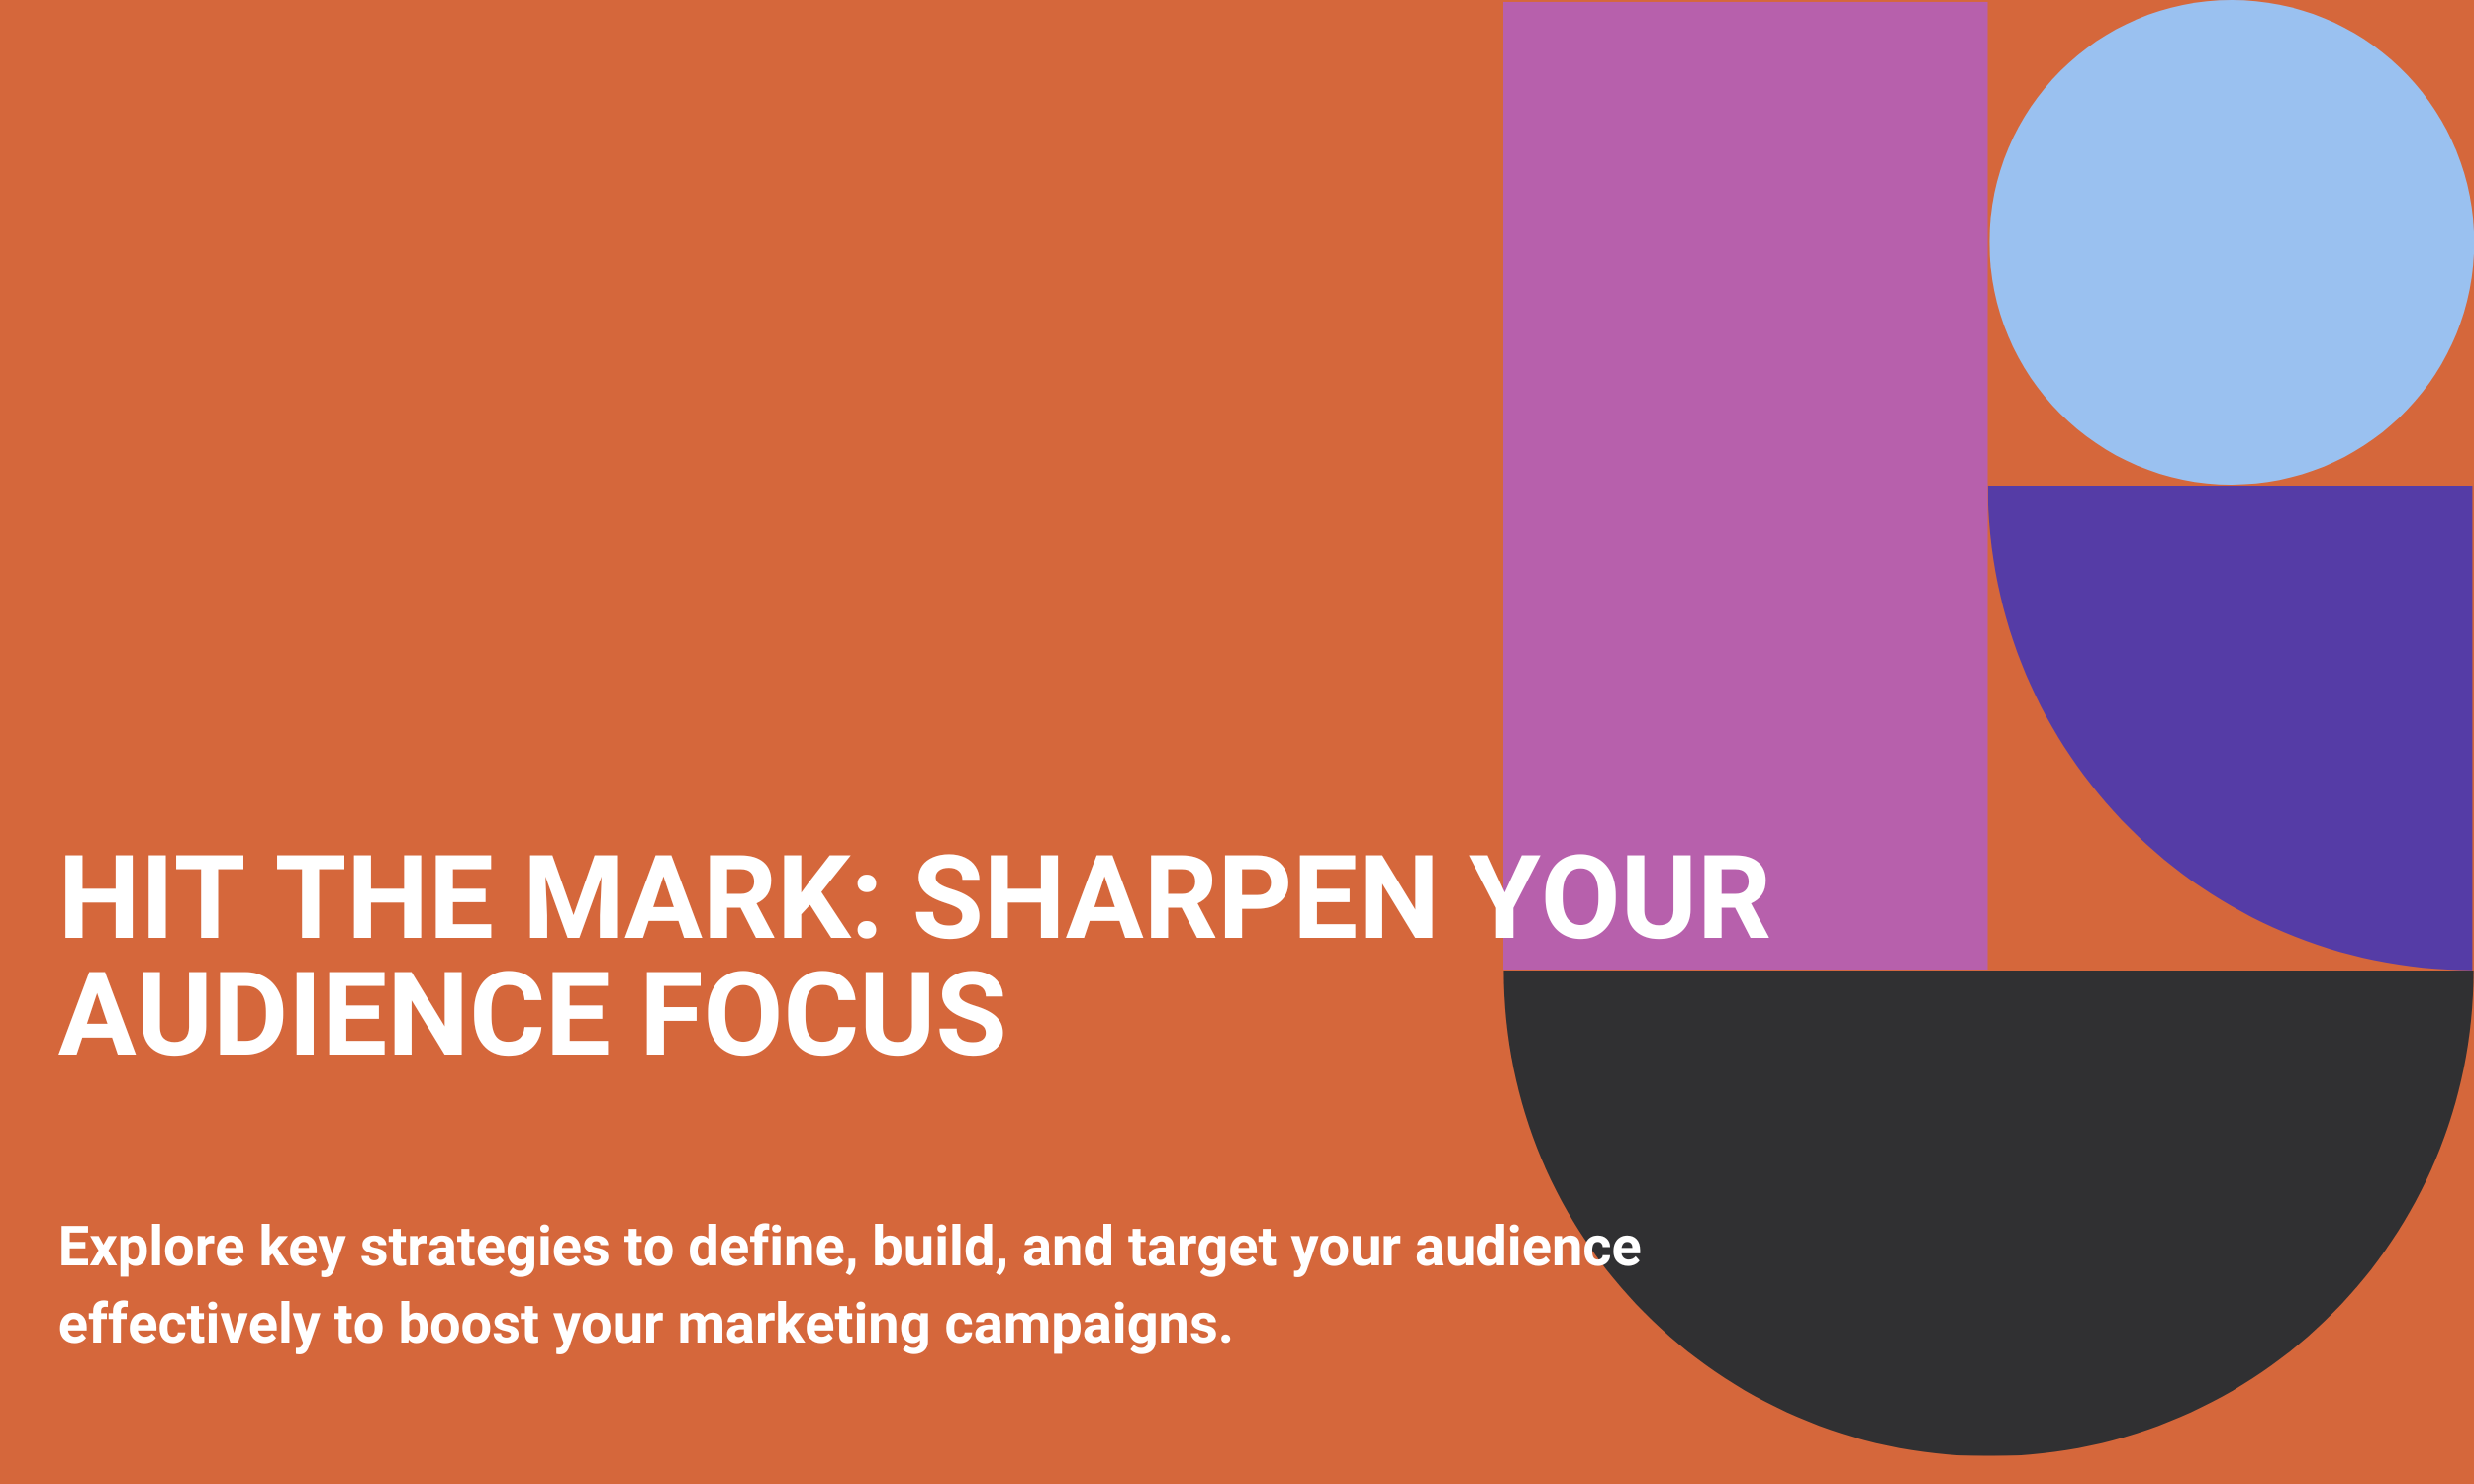 Hit the Mark: Sharpen Your Audience Focus